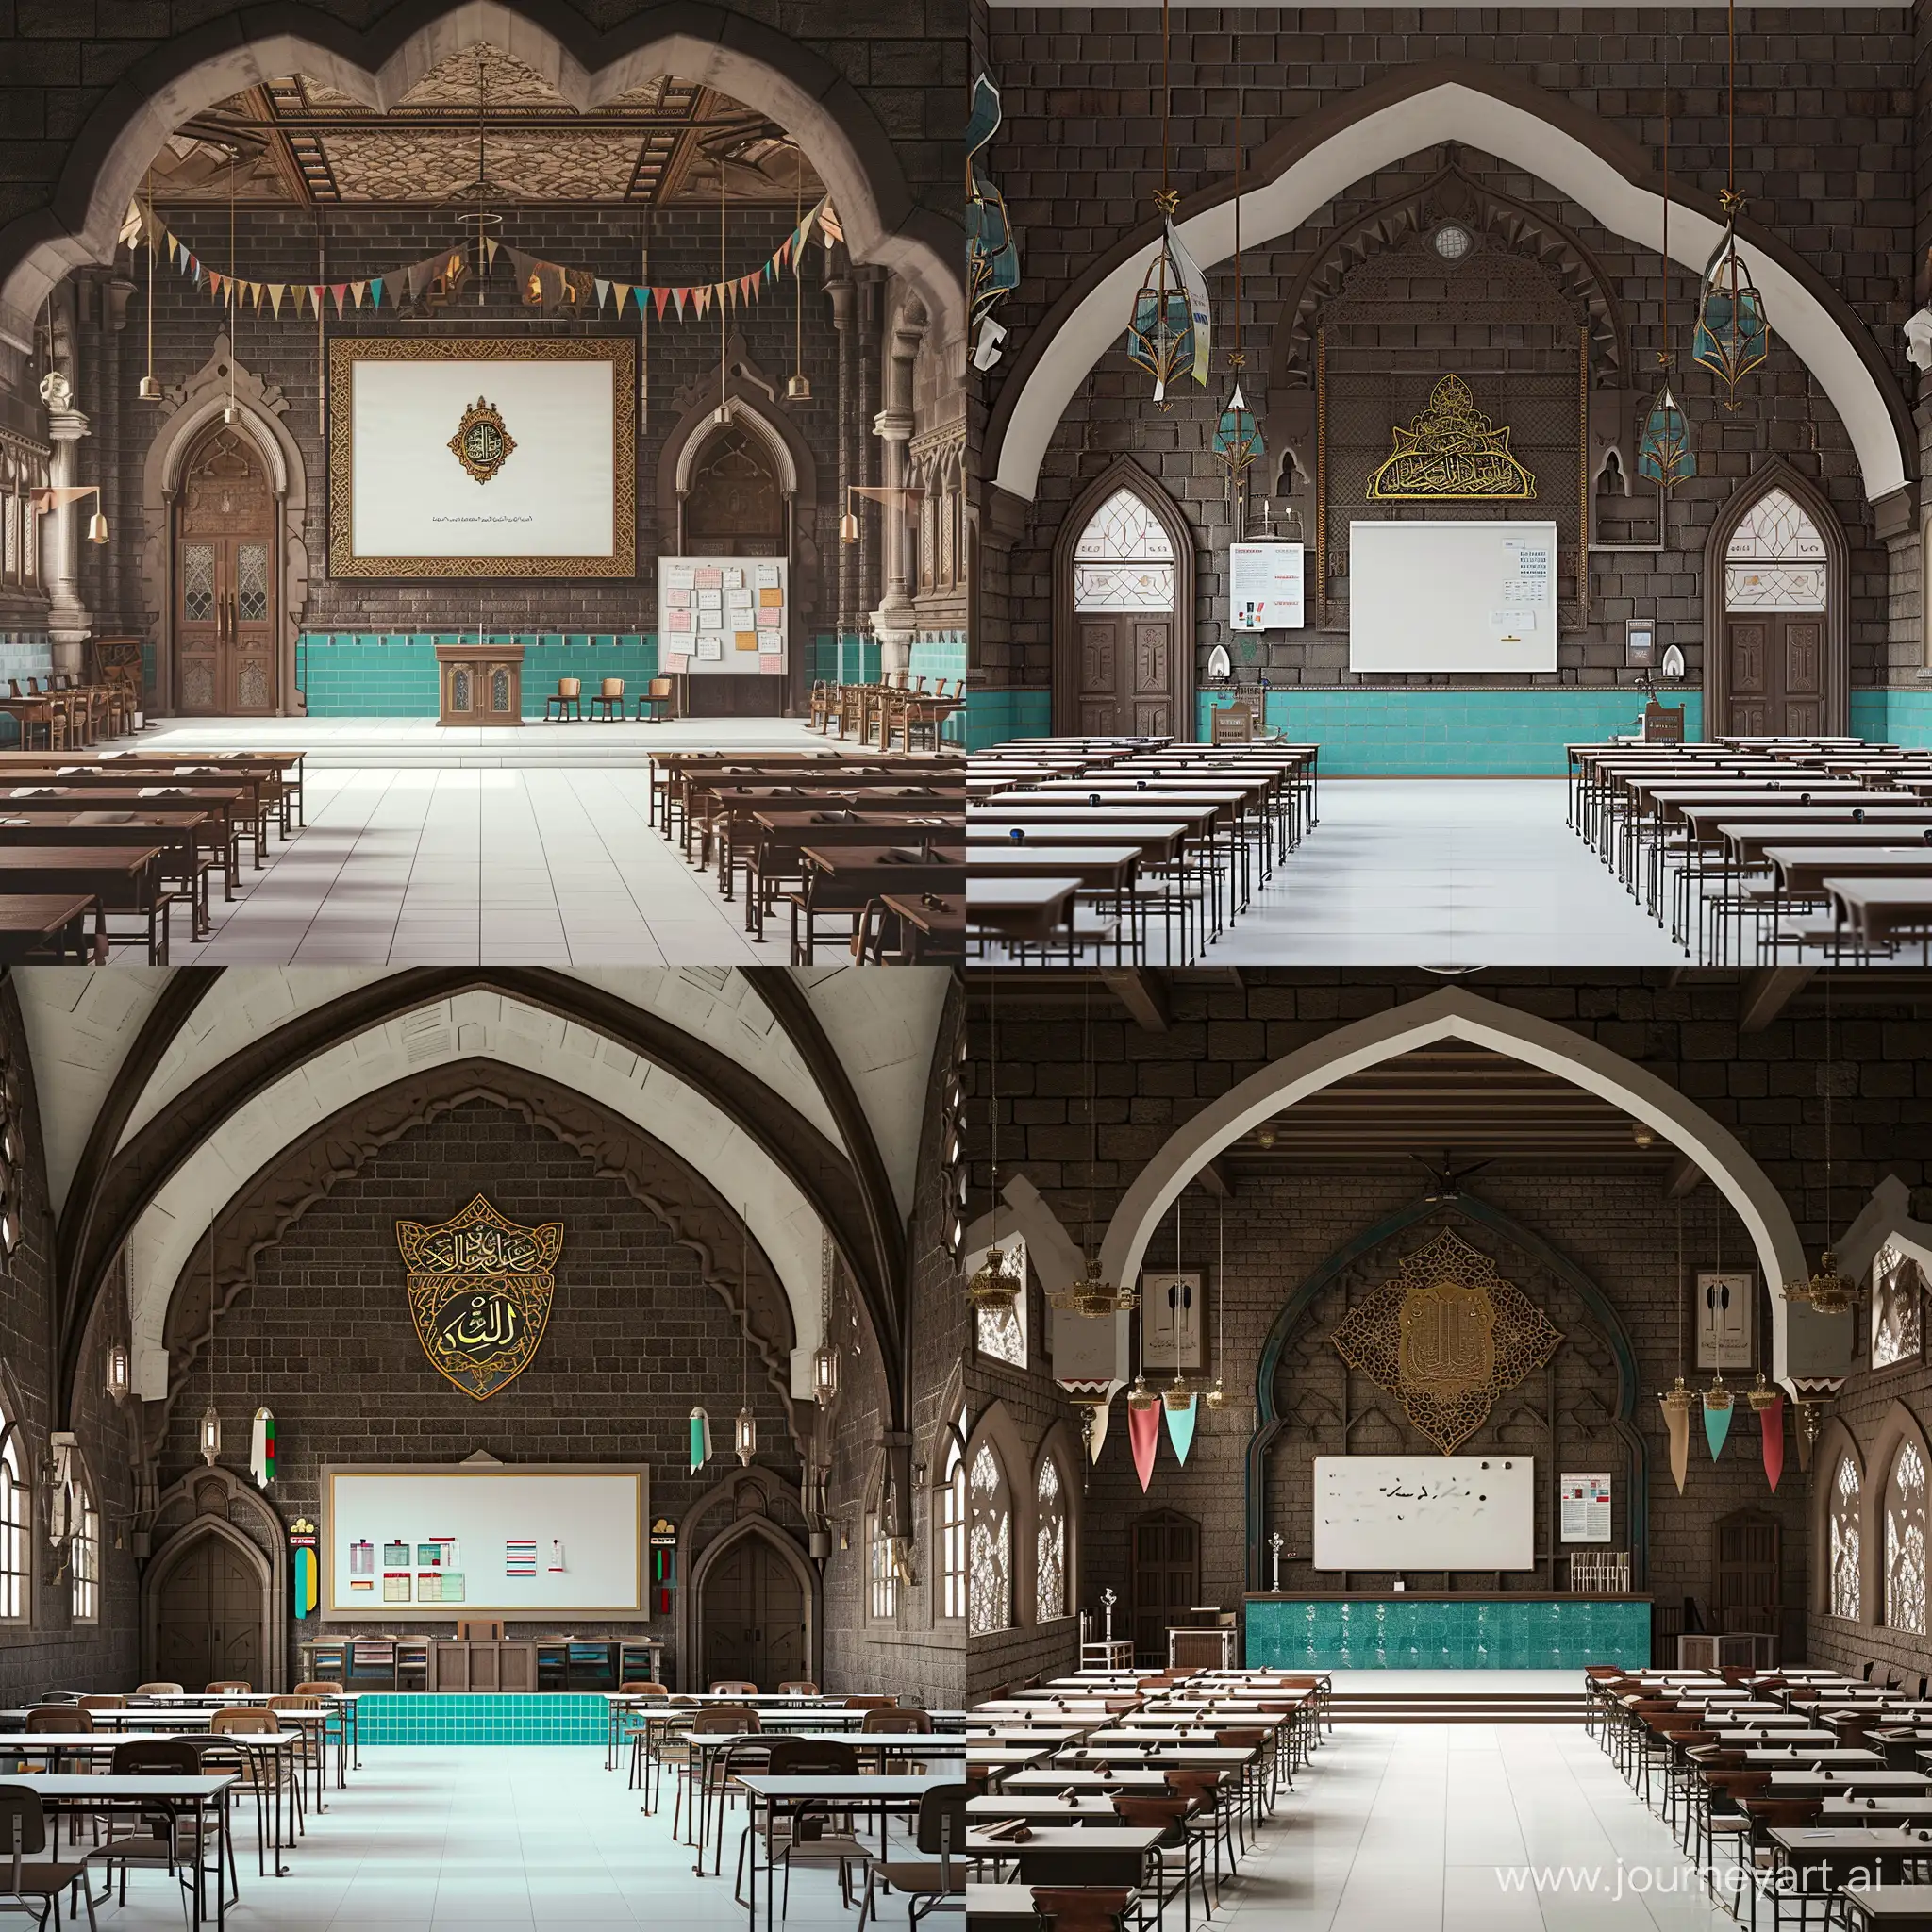 islamic arch vaulted classroom, plain interior made of darkbrown stone bricks, a whiteboard enclosed within golden arabesque frame is hanging on the front, noticeboard having pinned posters is on inwards going side wall, many desks with chairs, white floor, turquoise tiled lower wall, heraldic crest on top, long flag banners hanging from ceiling edges, islamic hanging lamps, minbar pulpit, arched side windows, two doors on front corners